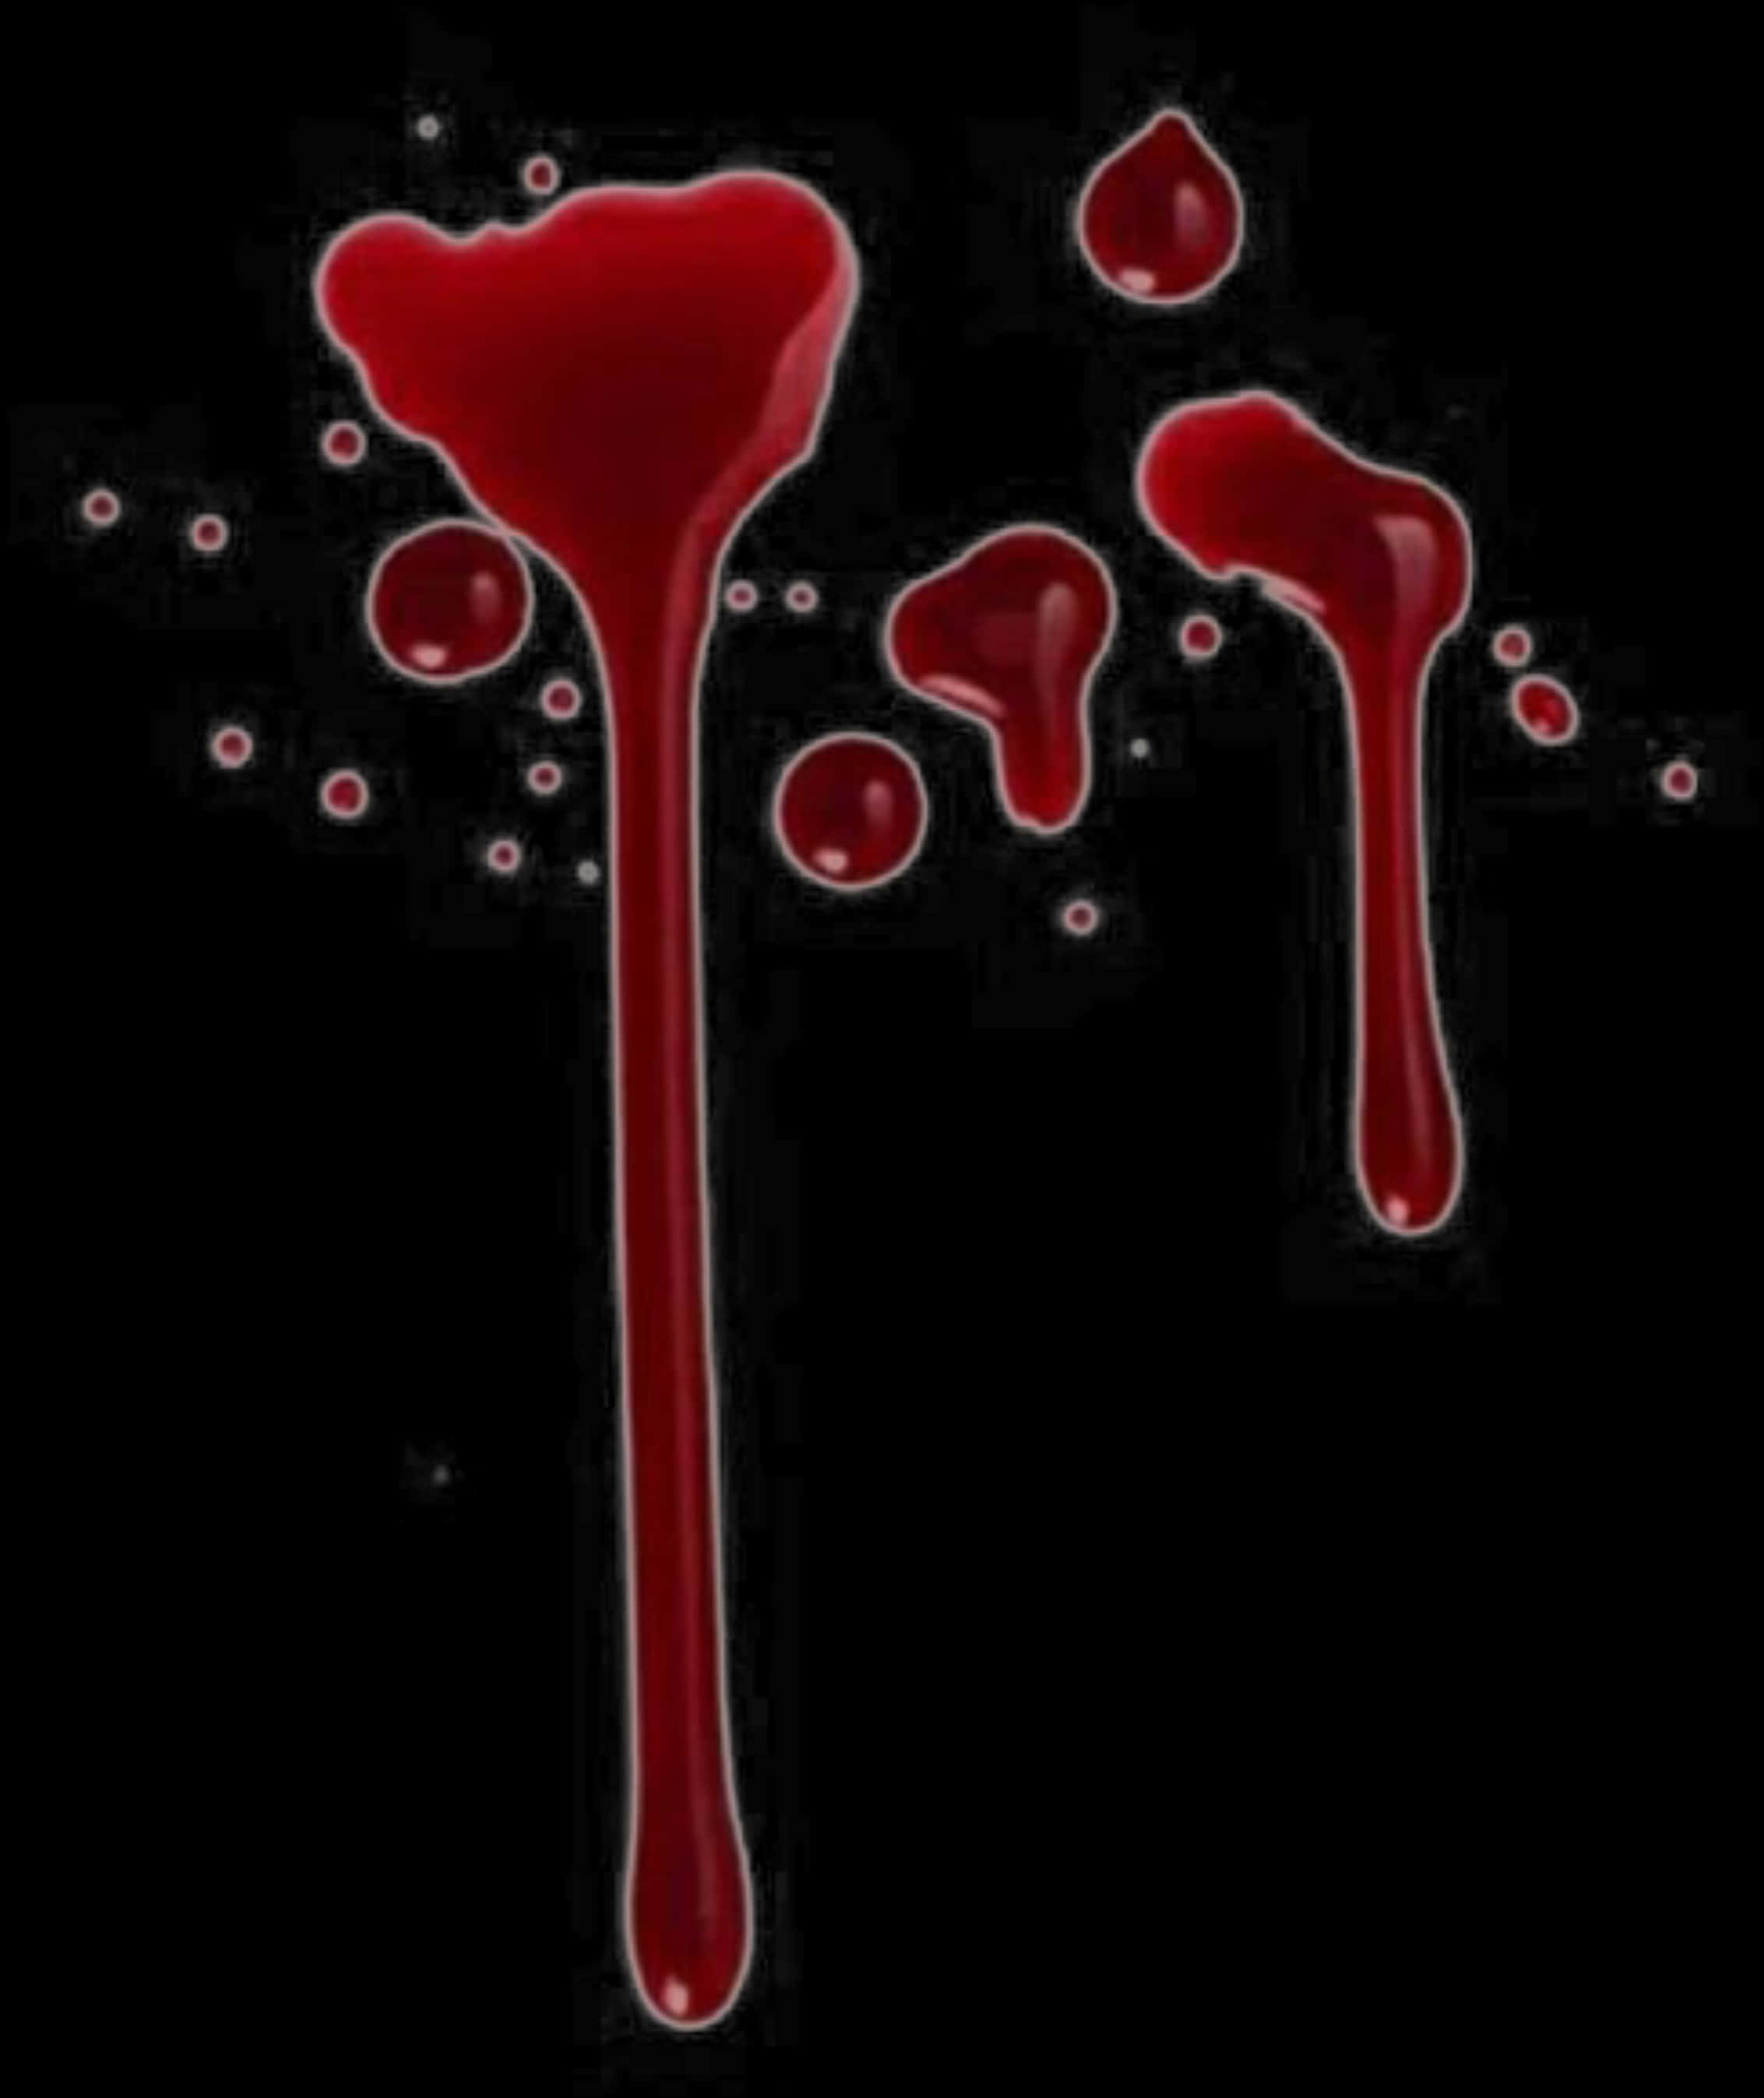 A Red Liquid Dripping From A Black Surface